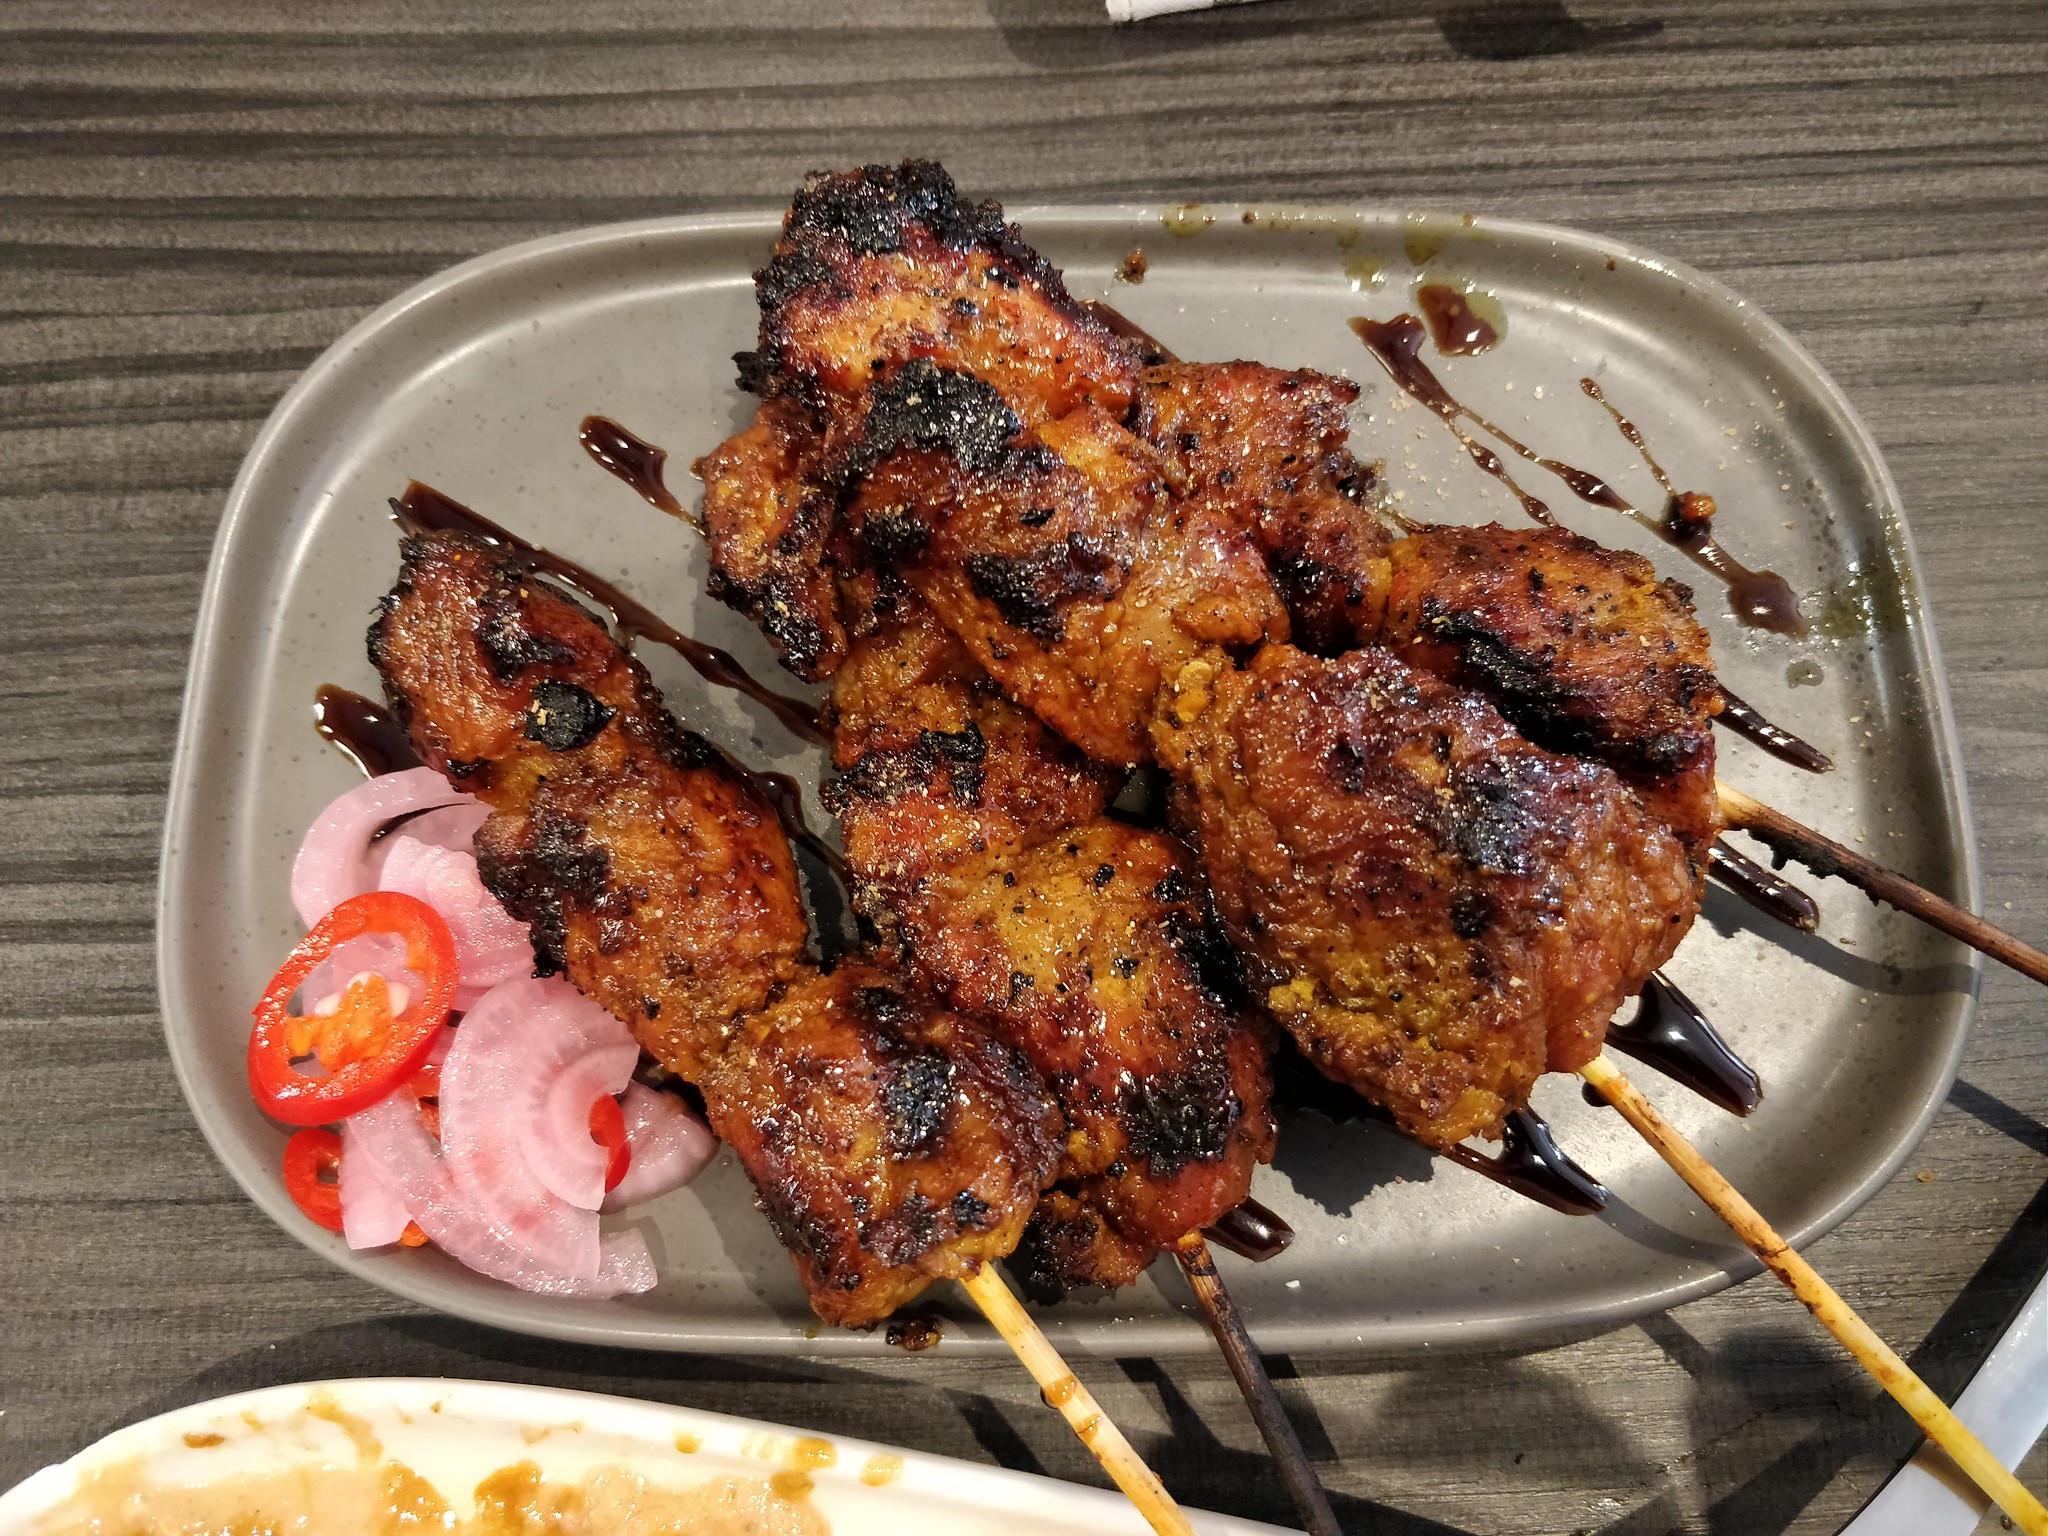 <p>The idea of pork satay skewers probably needs no introduction, but Disney serves them (if you know how to find them) in a delicious soy-ginger sauce, with a side of pickled-onion slaw. </p>